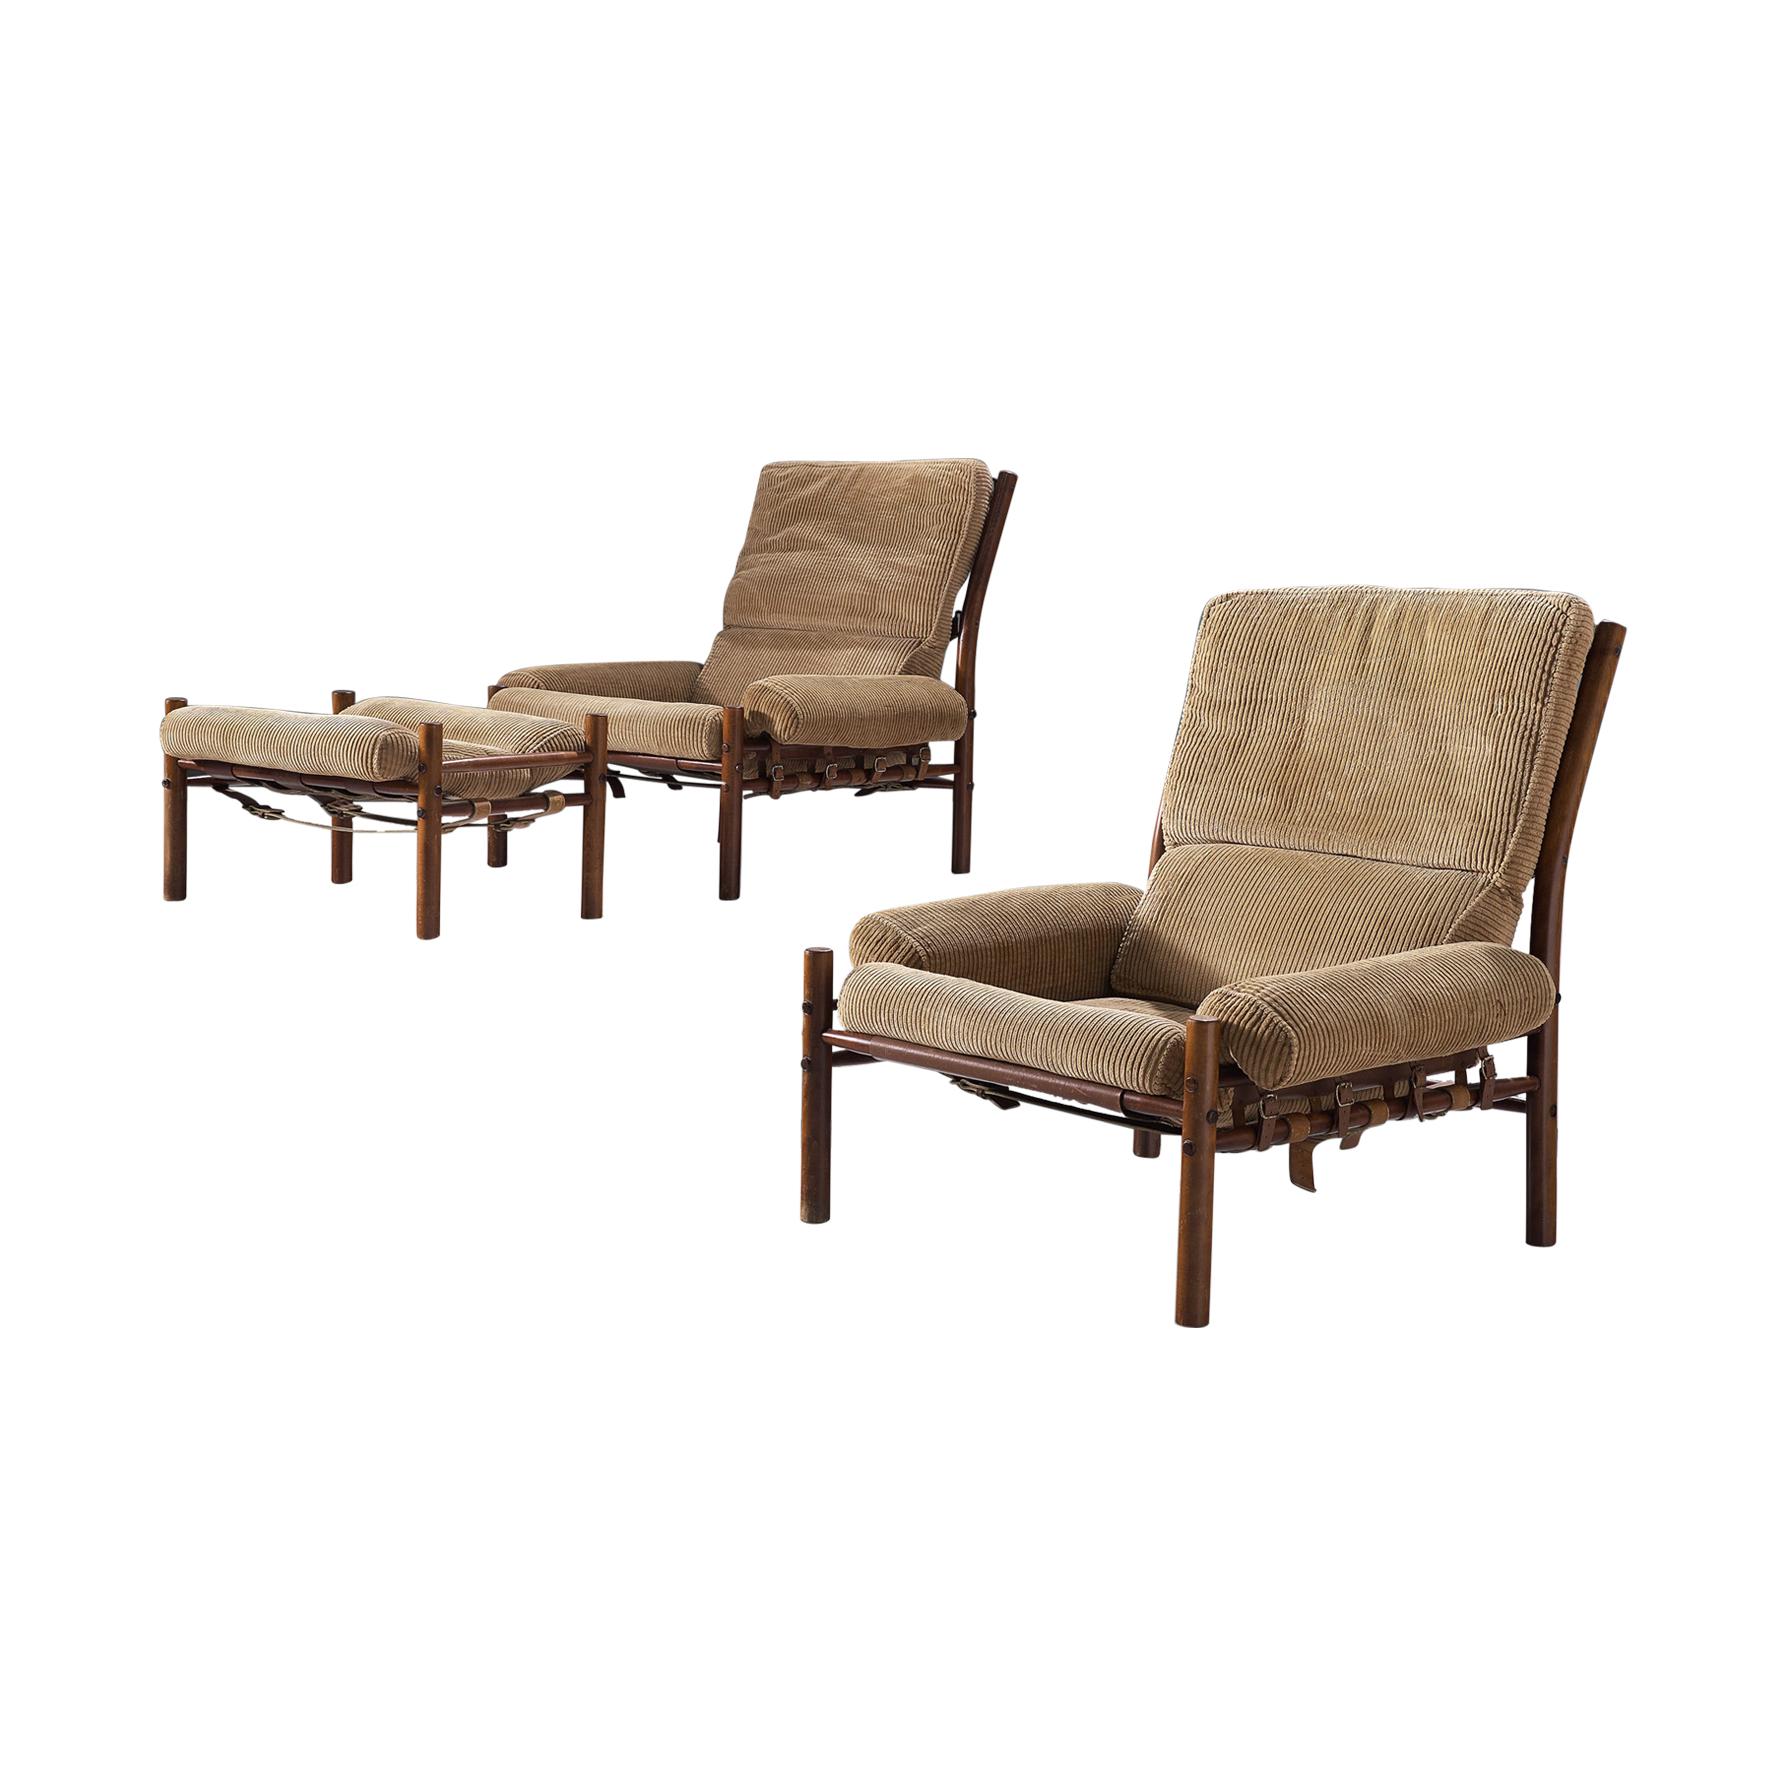 Pair of 'Inca' Lounge Chairs with Ottoman in Corduroy by Arne Norell